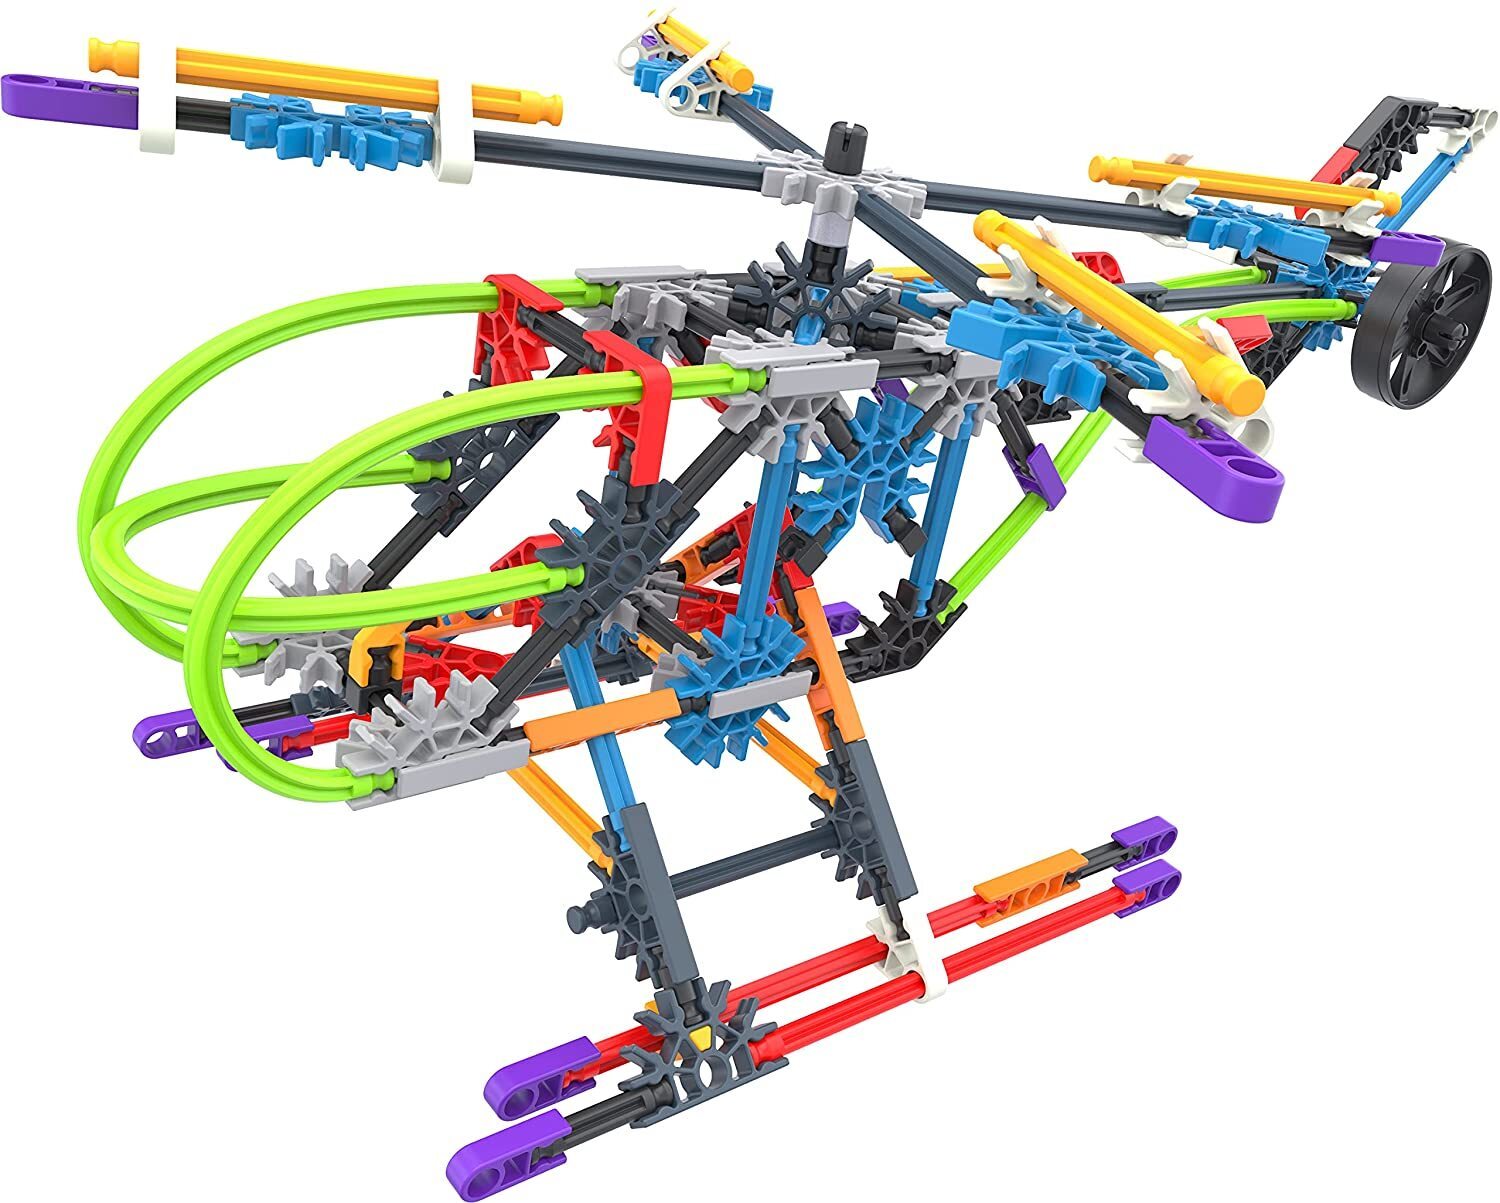 K'nex Wings and Wheels 500 pieces 30Builds